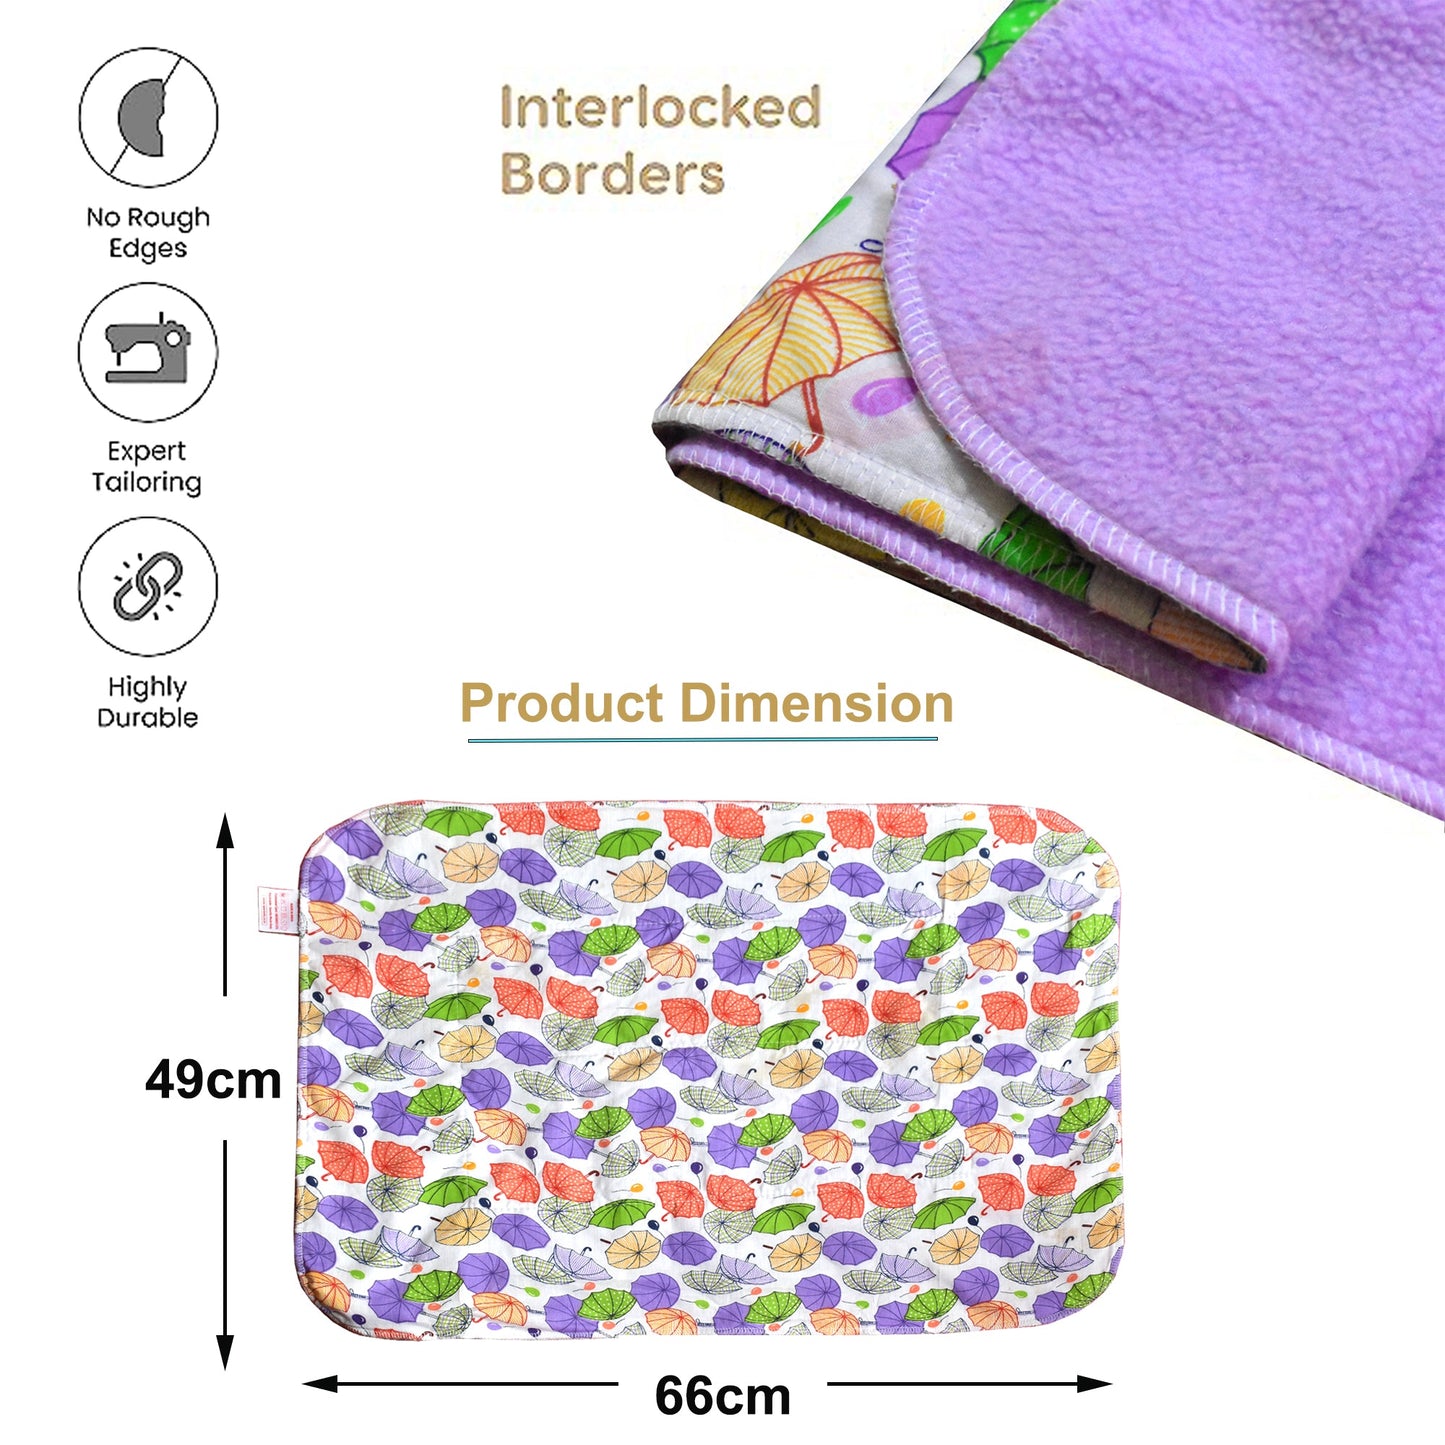 Vparents  Sleeping mats Water Proof Bed Protector with one Side Fabric New Born Baby(0-6) month